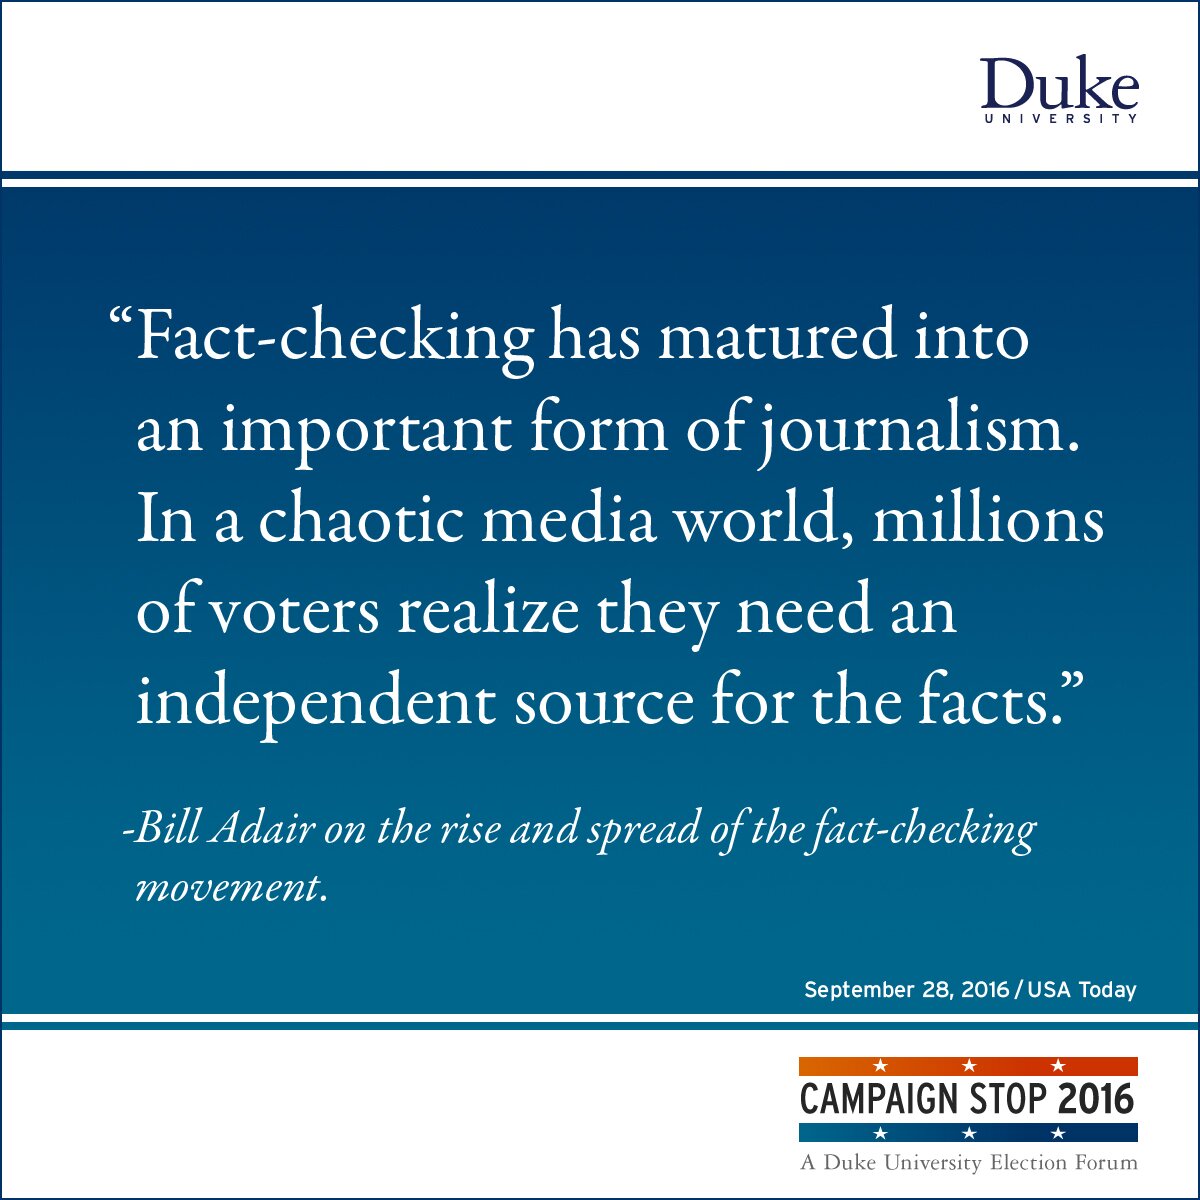 “Fact-checking has matured into an important form of journalism. In a chaotic media world, millions of voters realize they need an independent source for the facts.” -Bill Adair on the rise and spread of the fact-checking movement.